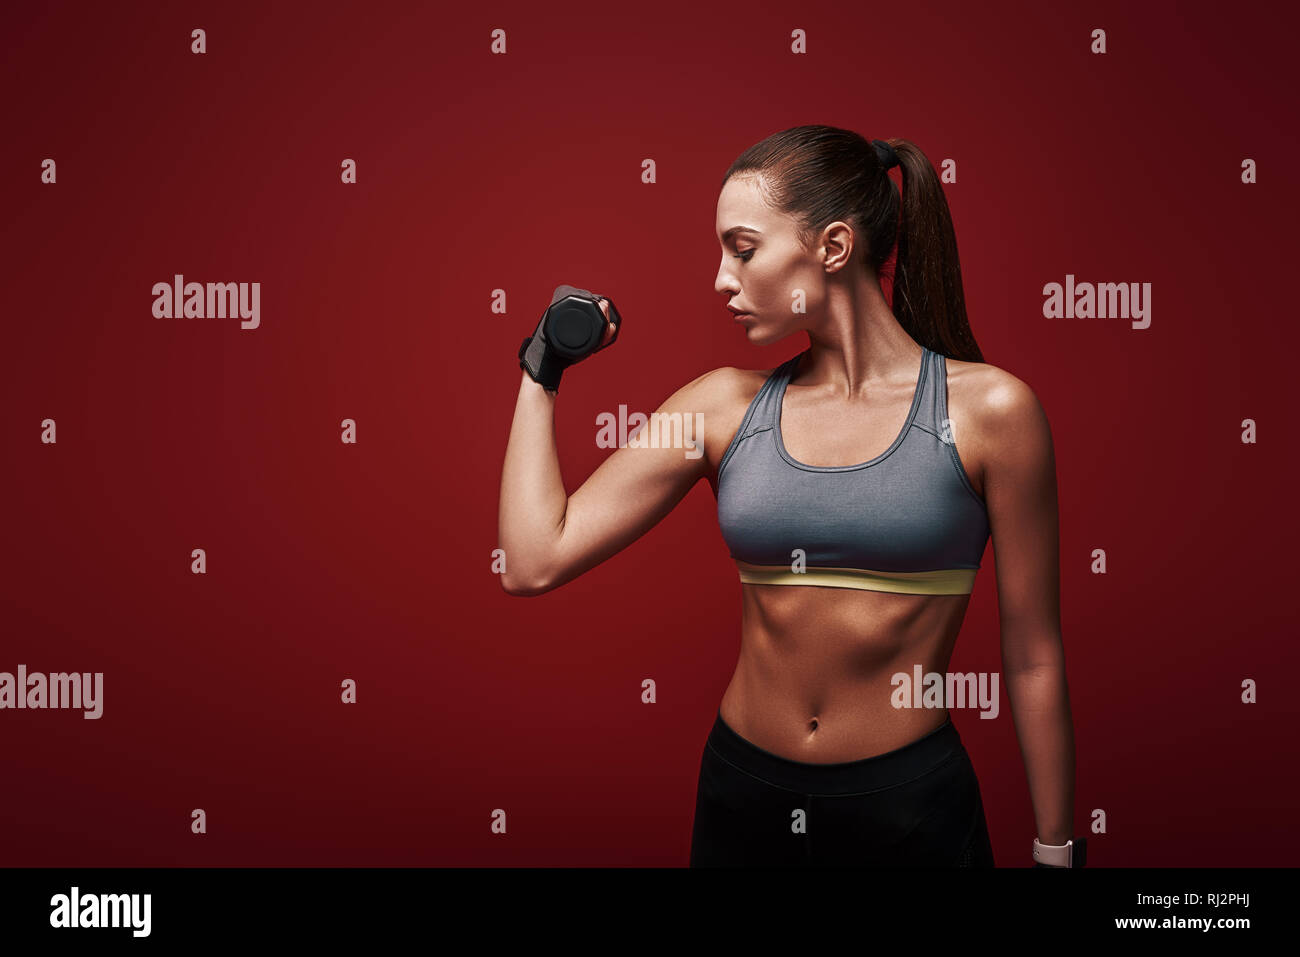 fitness woman with girl red alamy stock photo